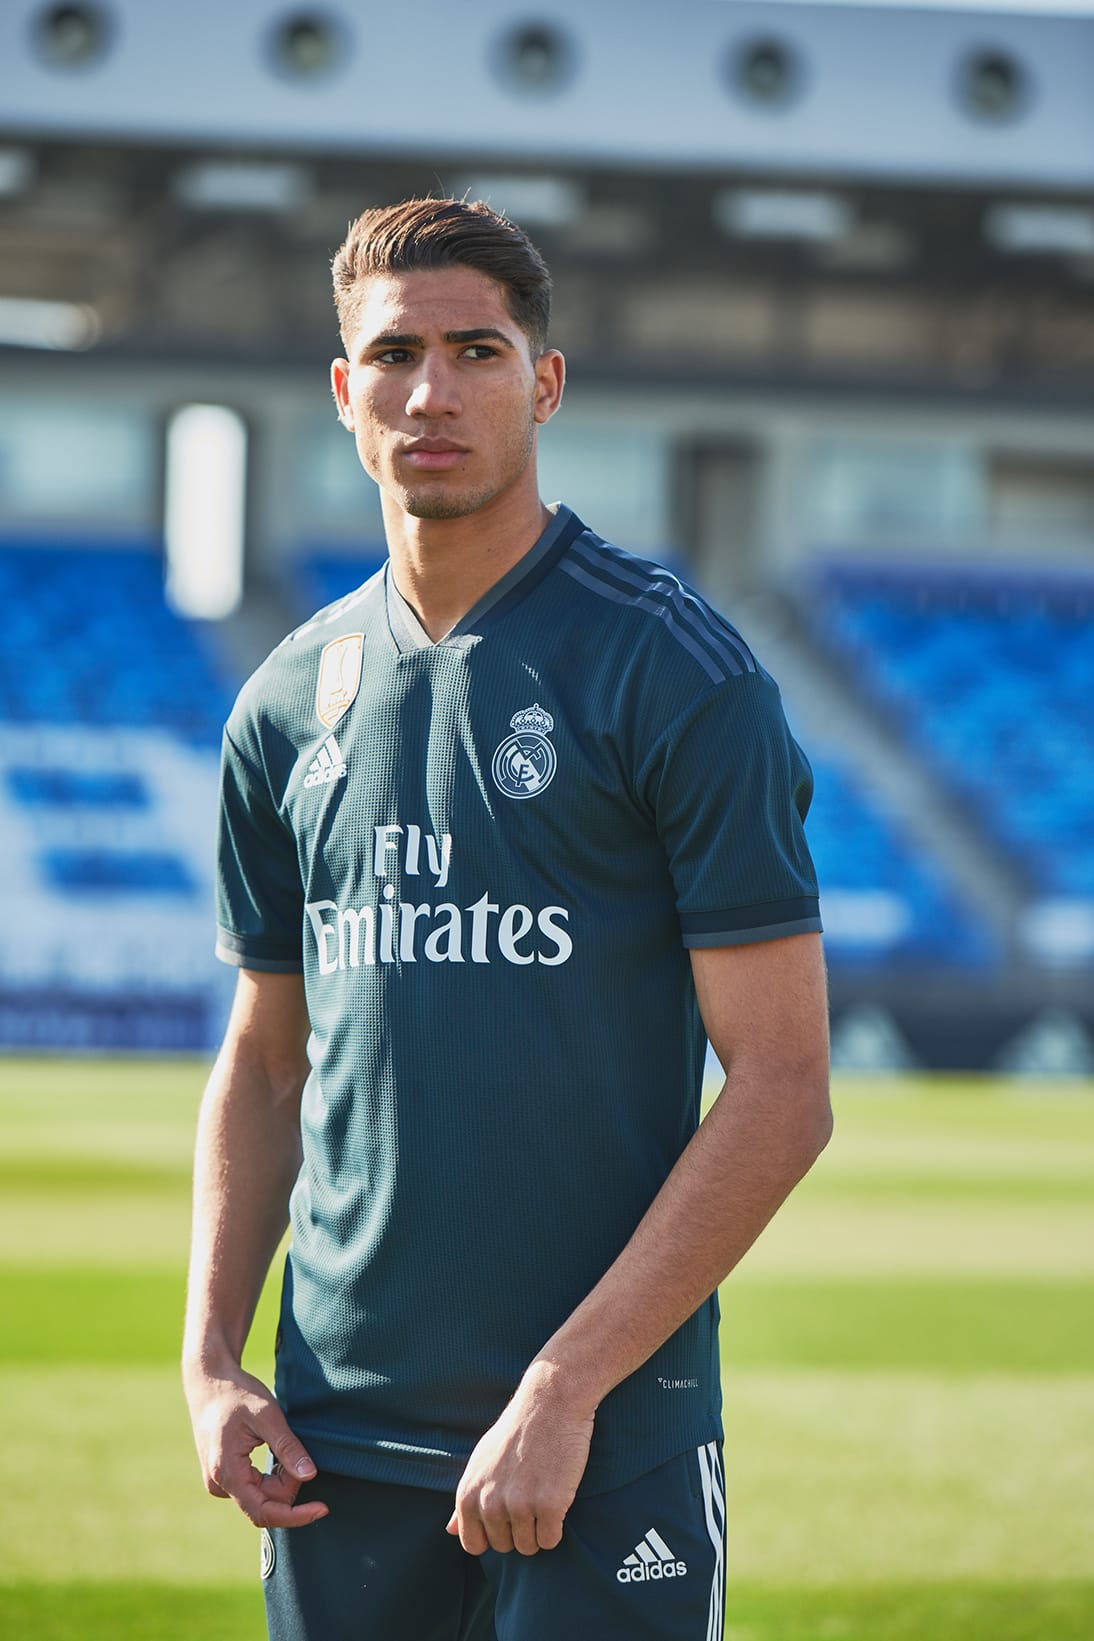 real madrid away jersey 2018